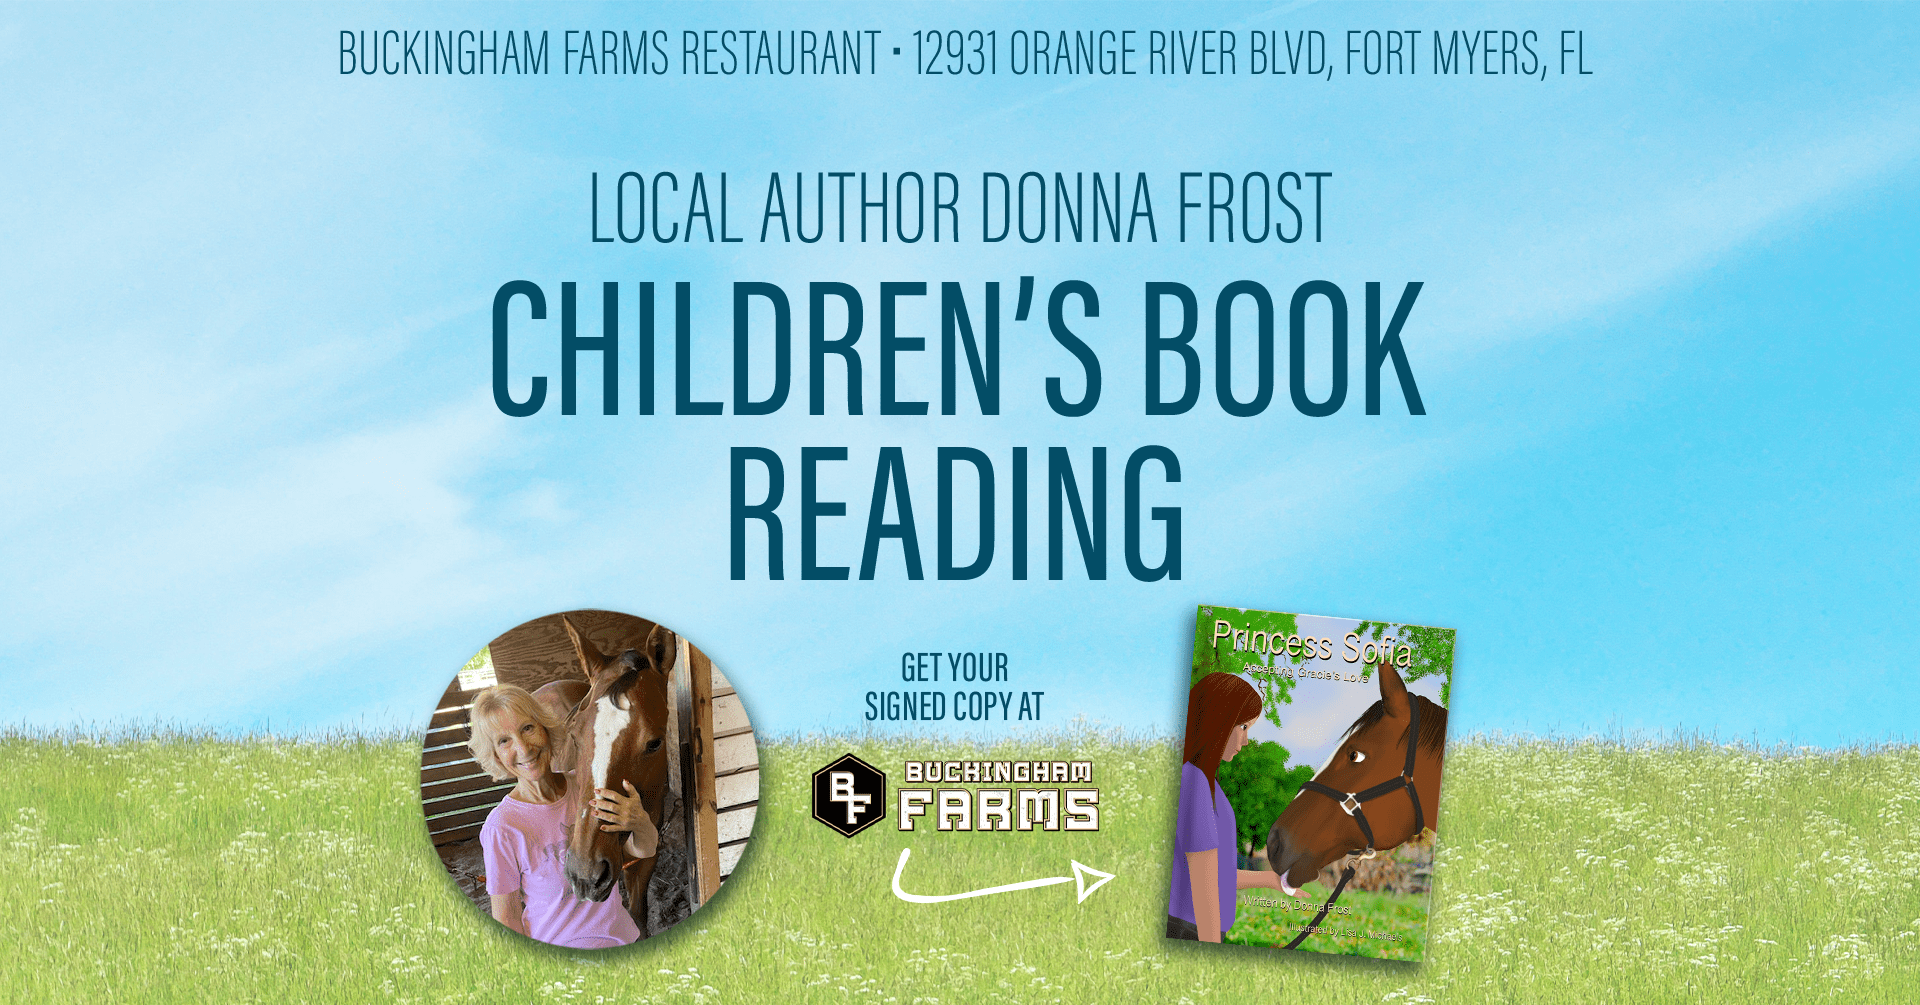 Donna Frost Book Reading of Princess Sofia: Accepting Gracie's Love at Buckingham Farms Restaurant